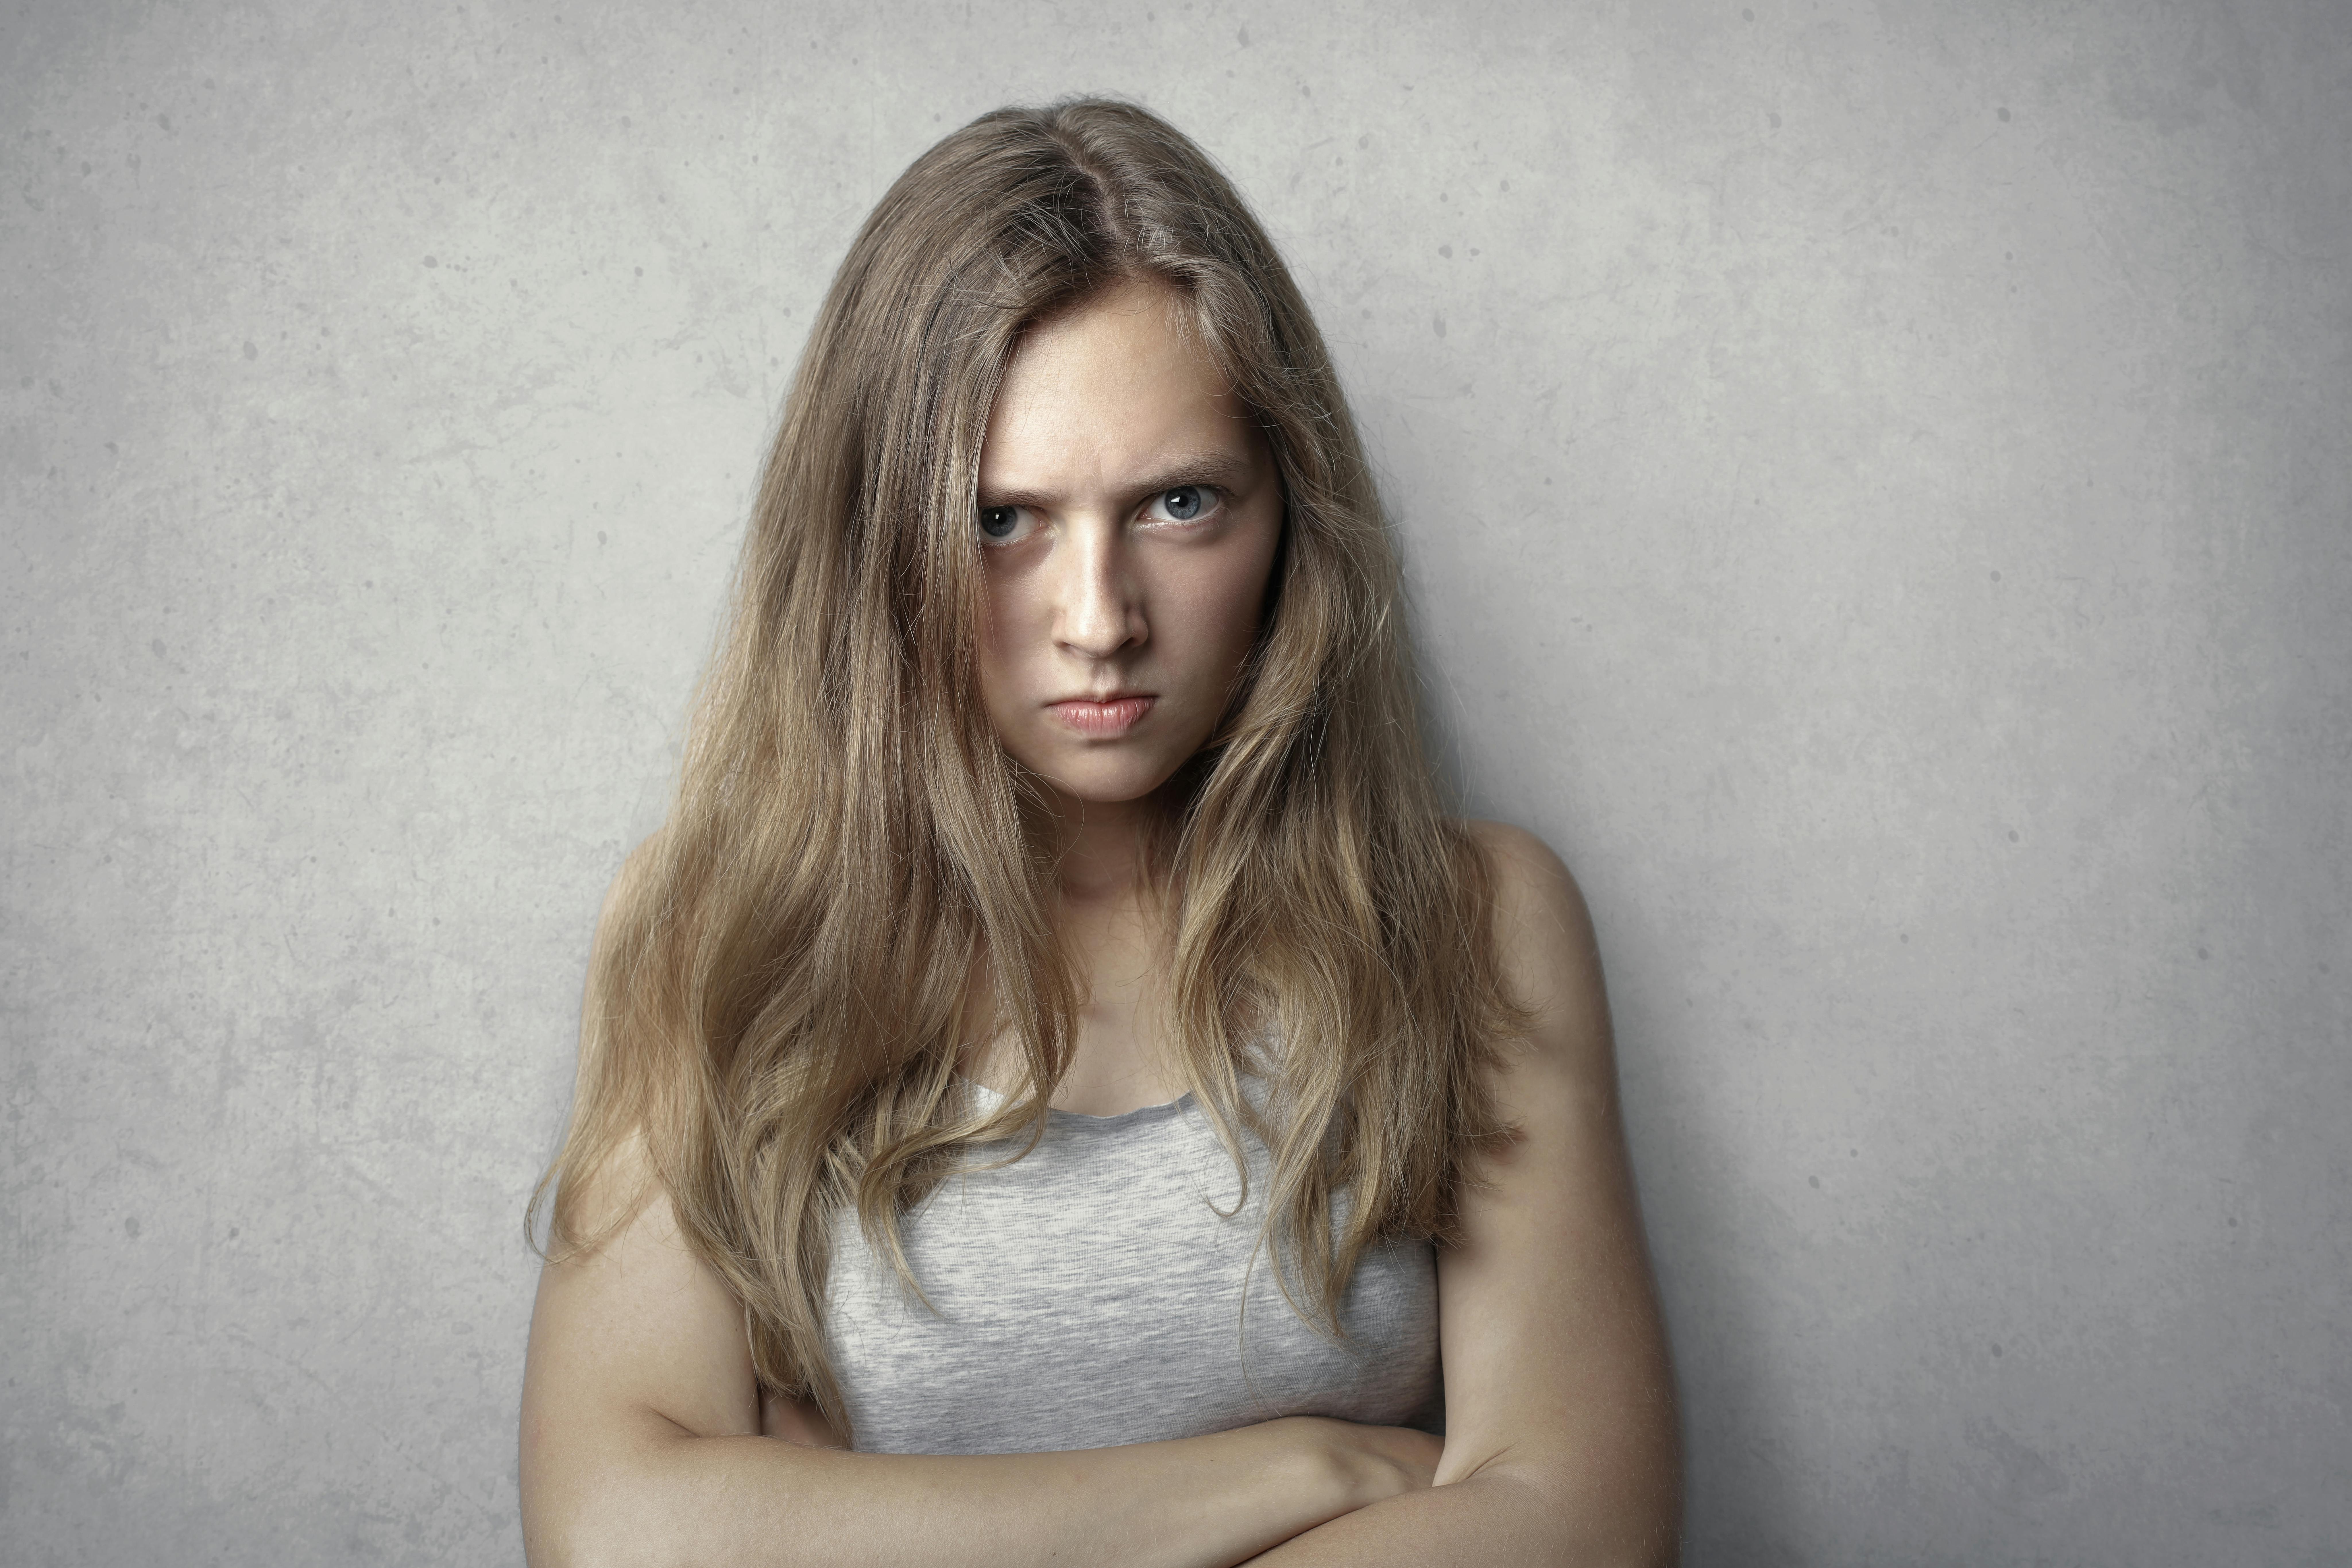 An angry woman with her arms folded | Source: Pexels